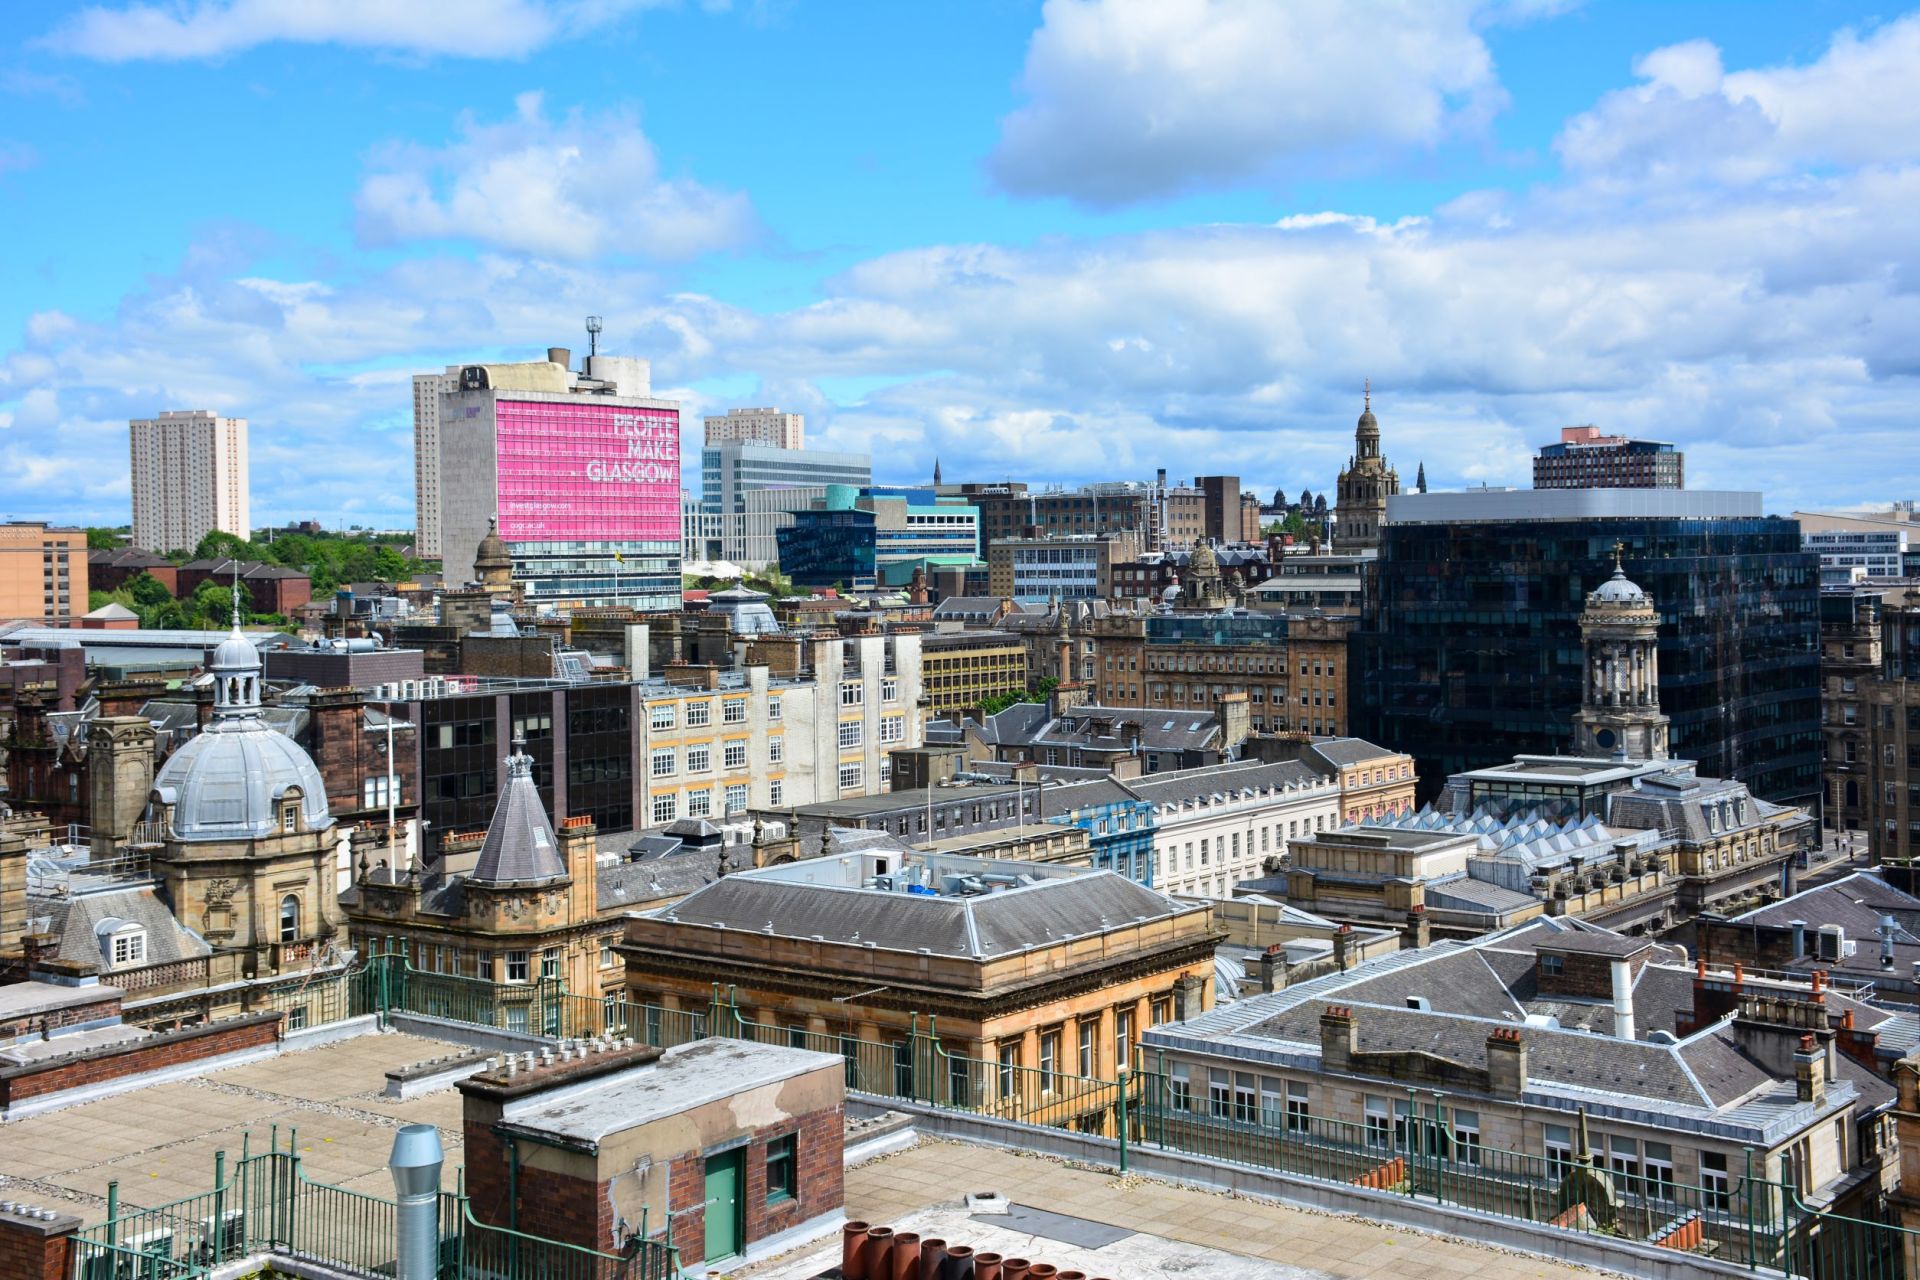 Bruntwood SciTech doubles down on Glasgow tech with £30m office